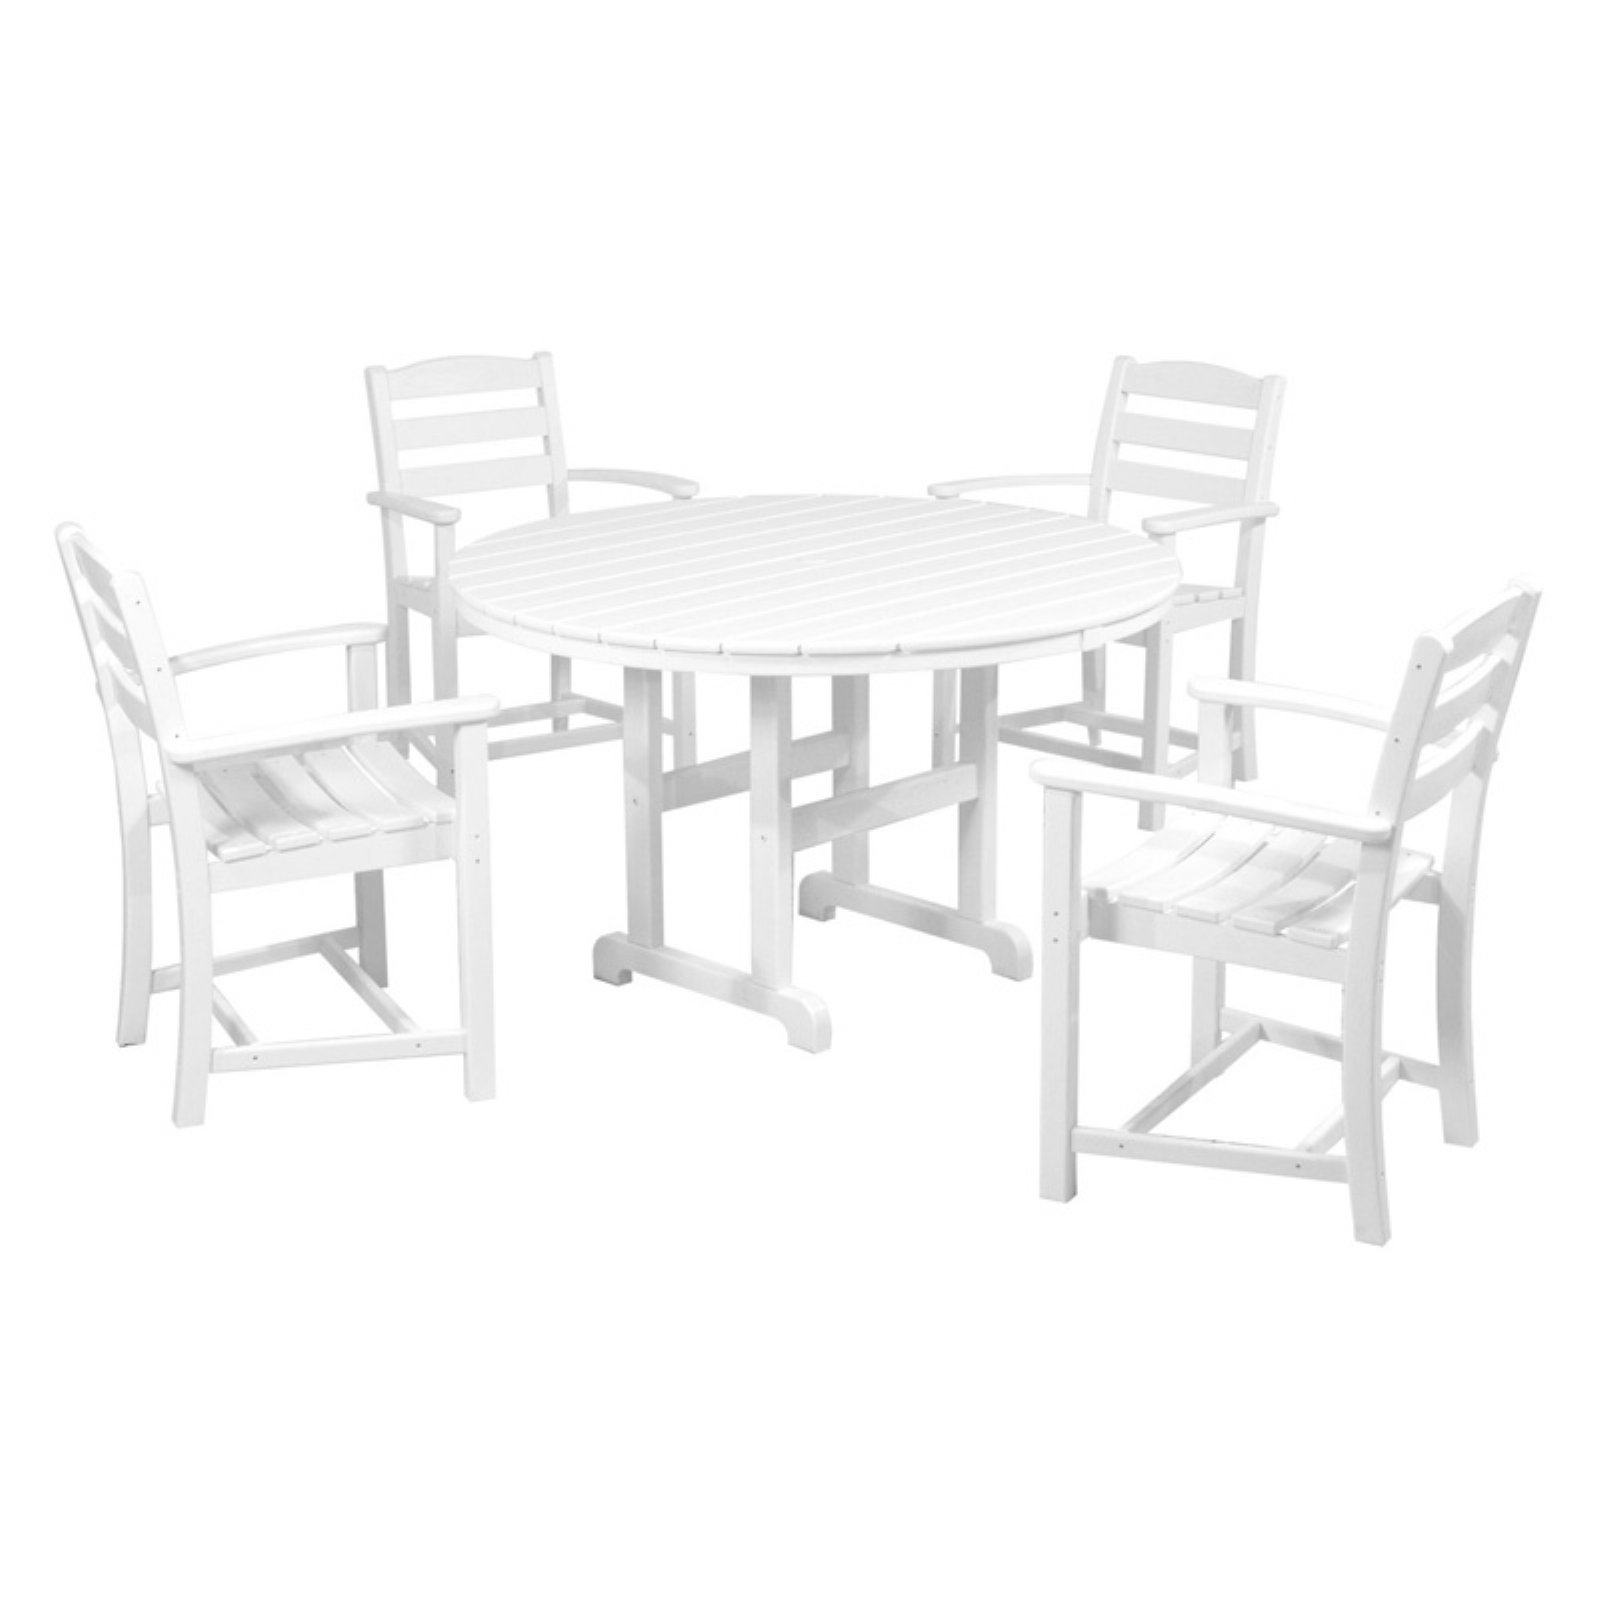 POLYWOOD La Casa Cafe 7-Piece Dining Set in White - image 1 of 4